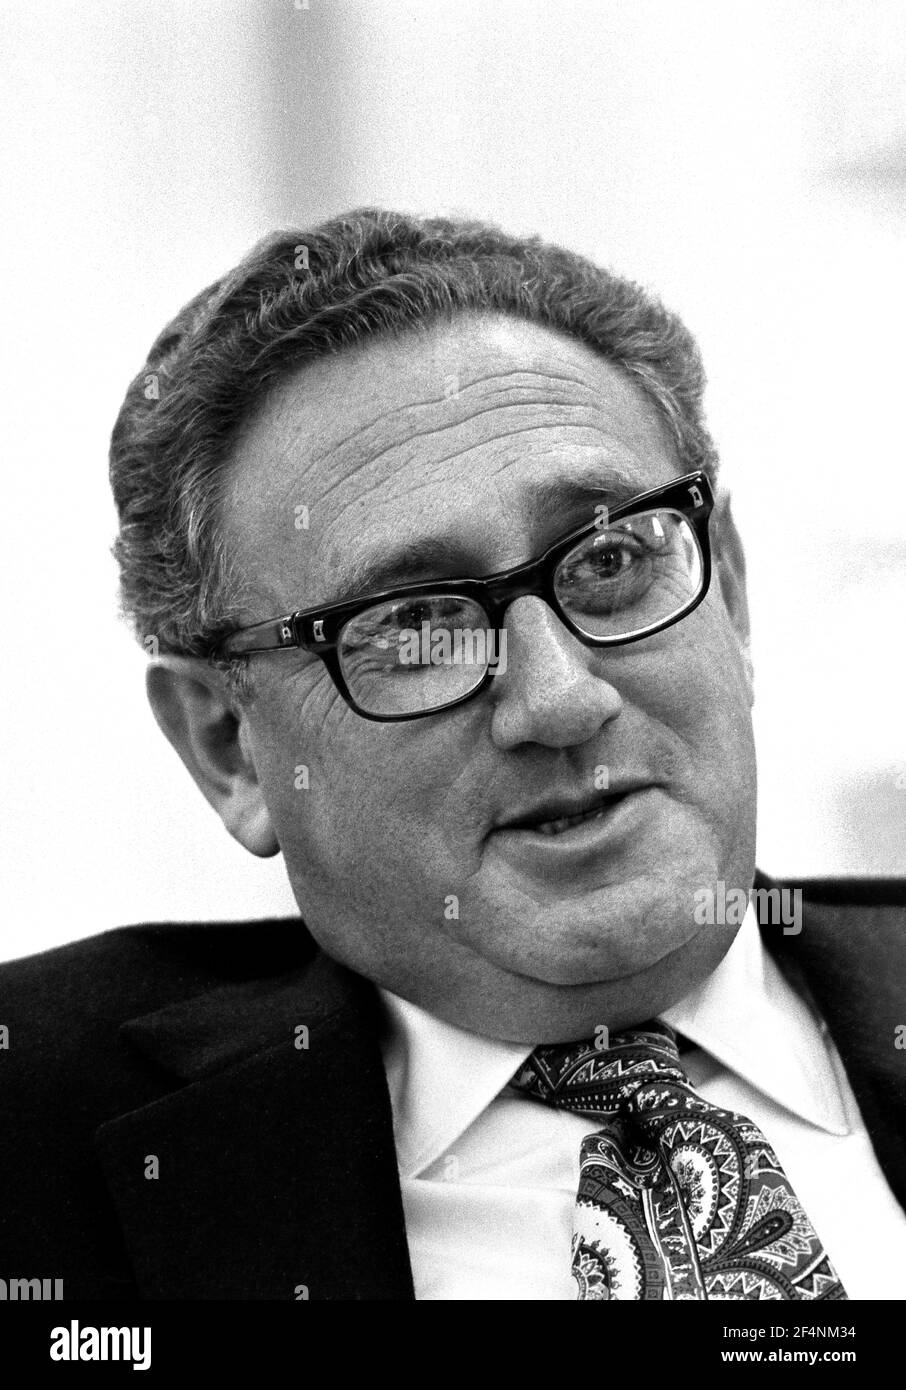 Henry Kissinger. Portrait of US Secretary of State, Henry Alfred Kissinger (b. Heinz Alfred Kissinger, 1923) during a Meeting in the Oval Office, 1975 Stock Photo